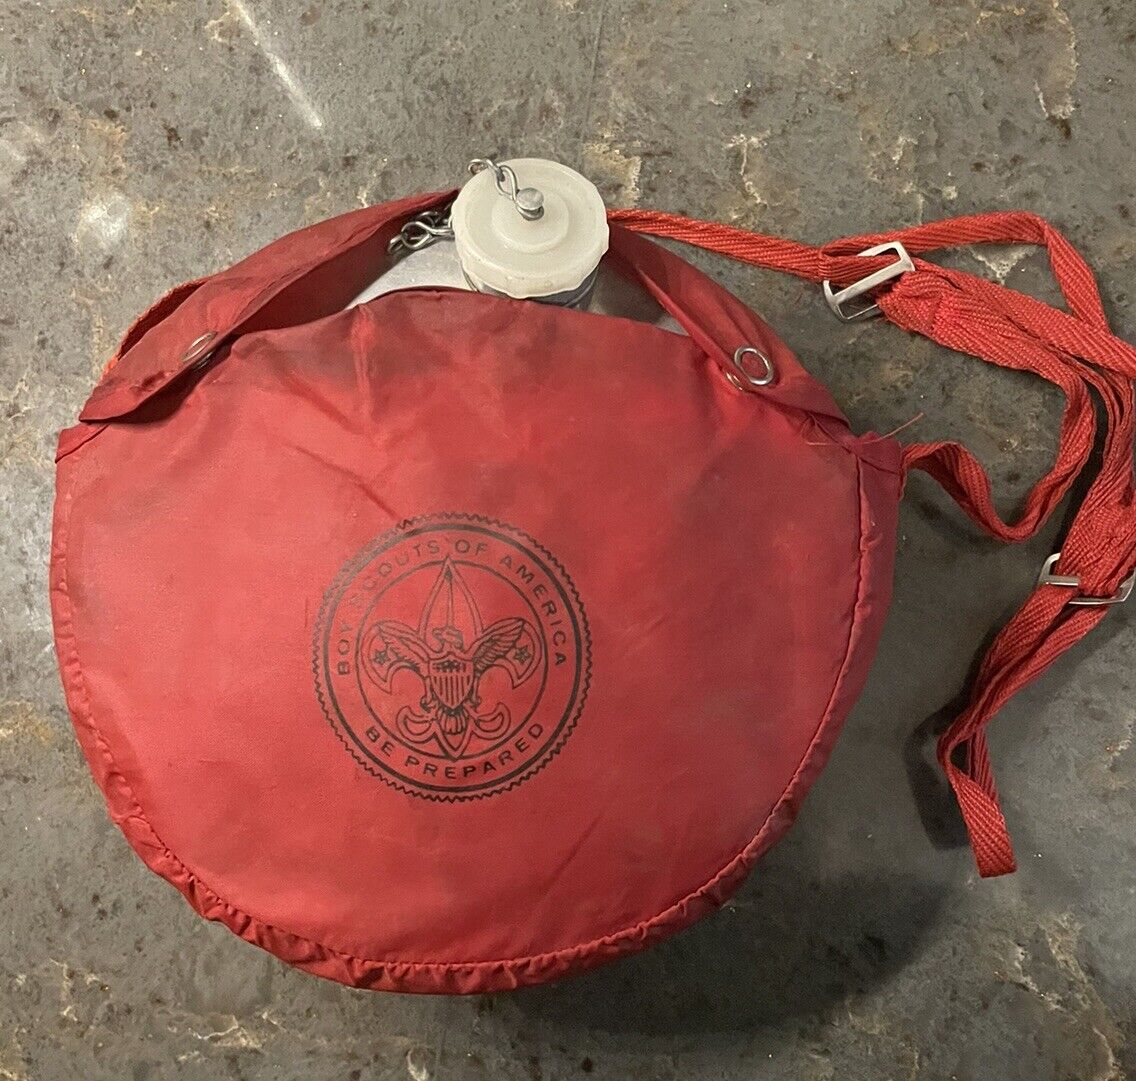 Vintage Boy Scouts Of America Canteen Two Quart Aluminum Red Nylon Case